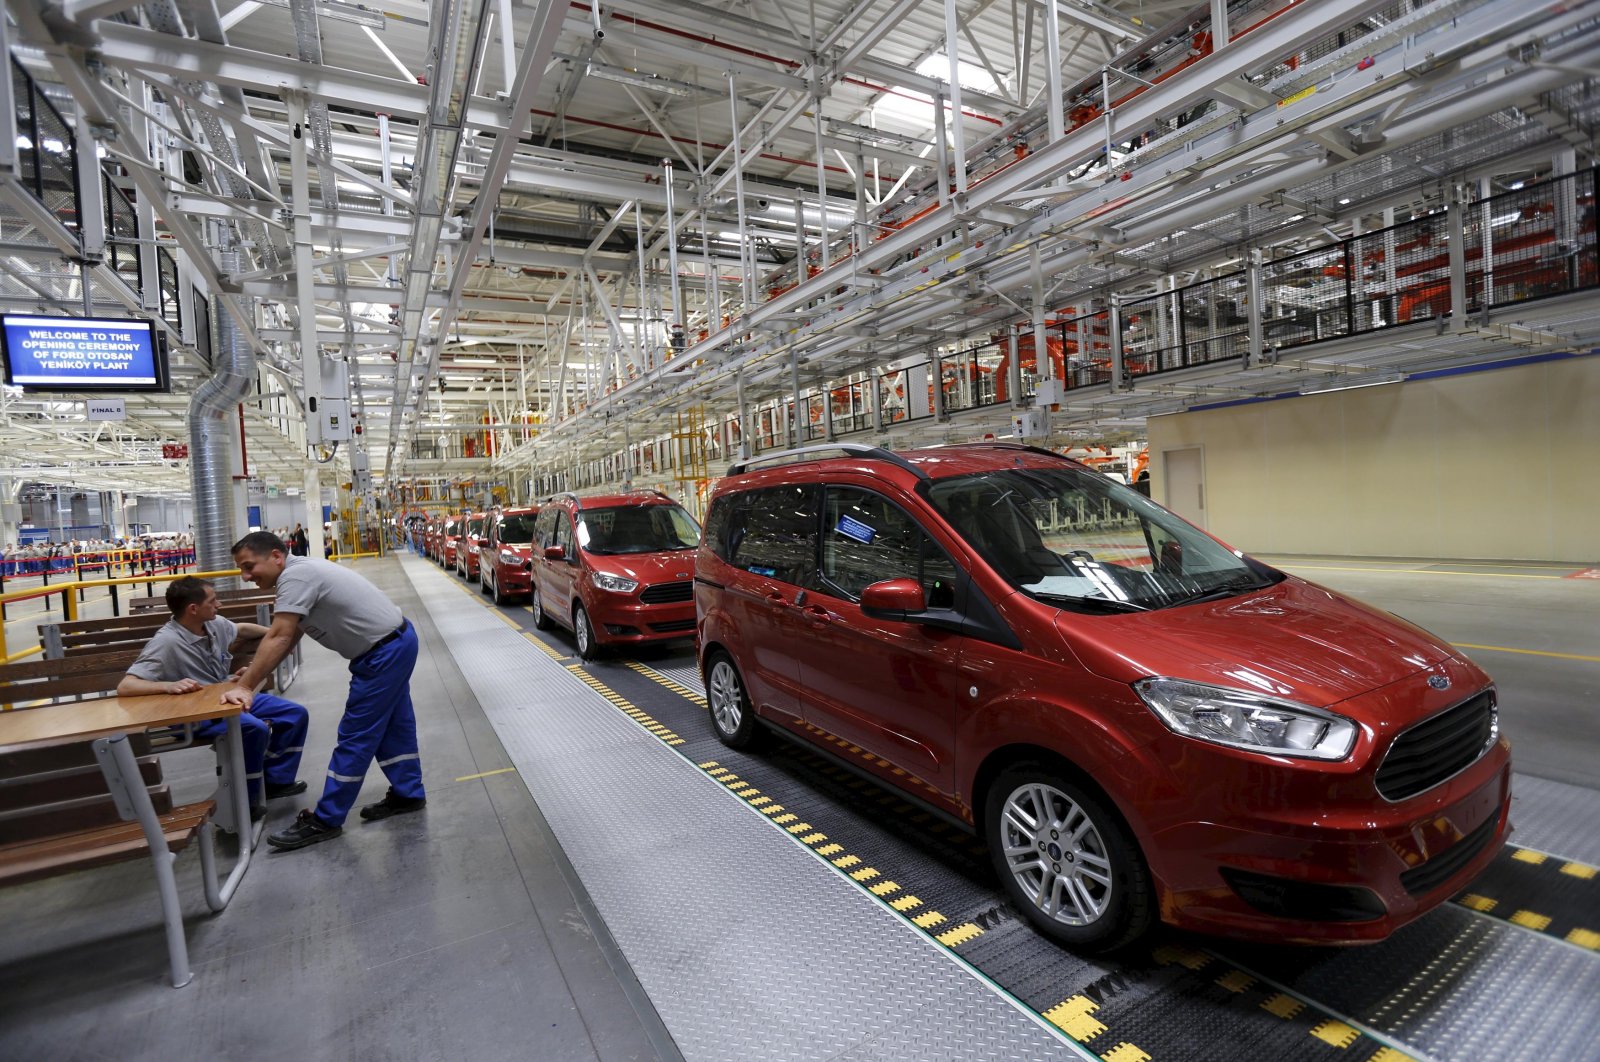 Ford Tourneo Courier light commercial vehicles are pictured at the Ford Otosan car plant in Kocaeli, Turkey, May 22, 2014. (Reuters Photo)